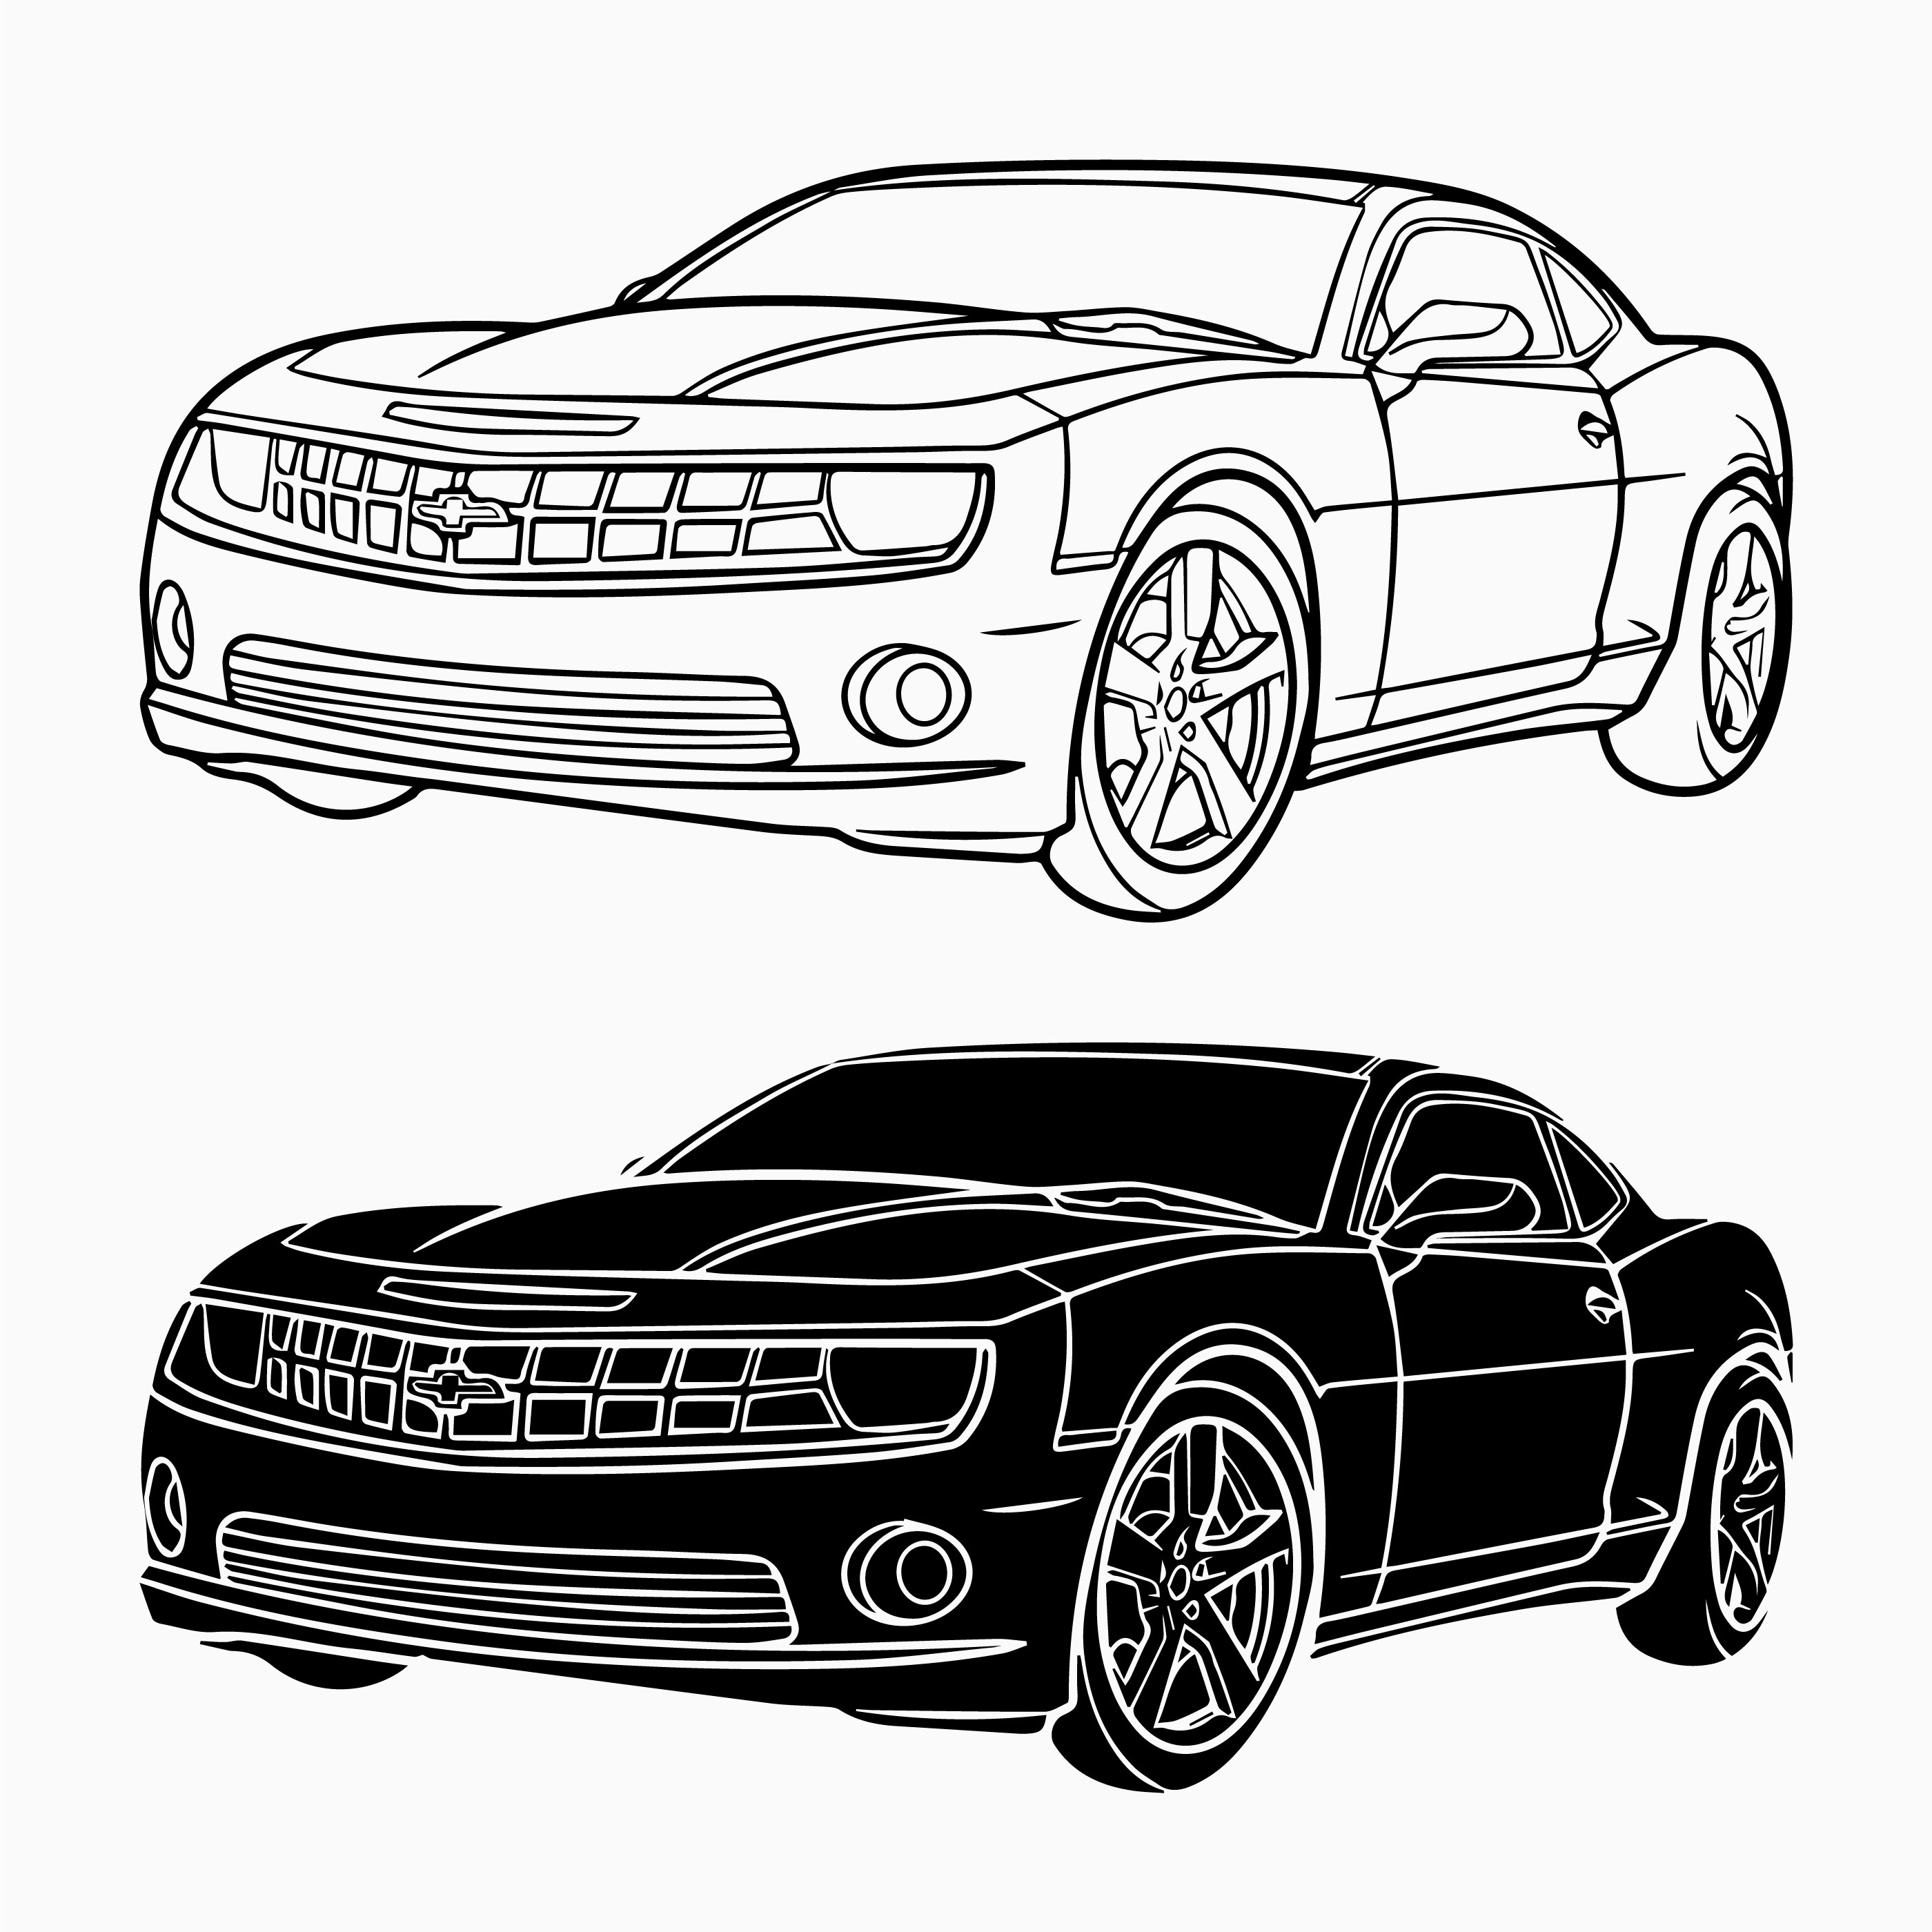 Browse 99 incredible Camaro vectors, icons, clipart graphics, and backgroun...